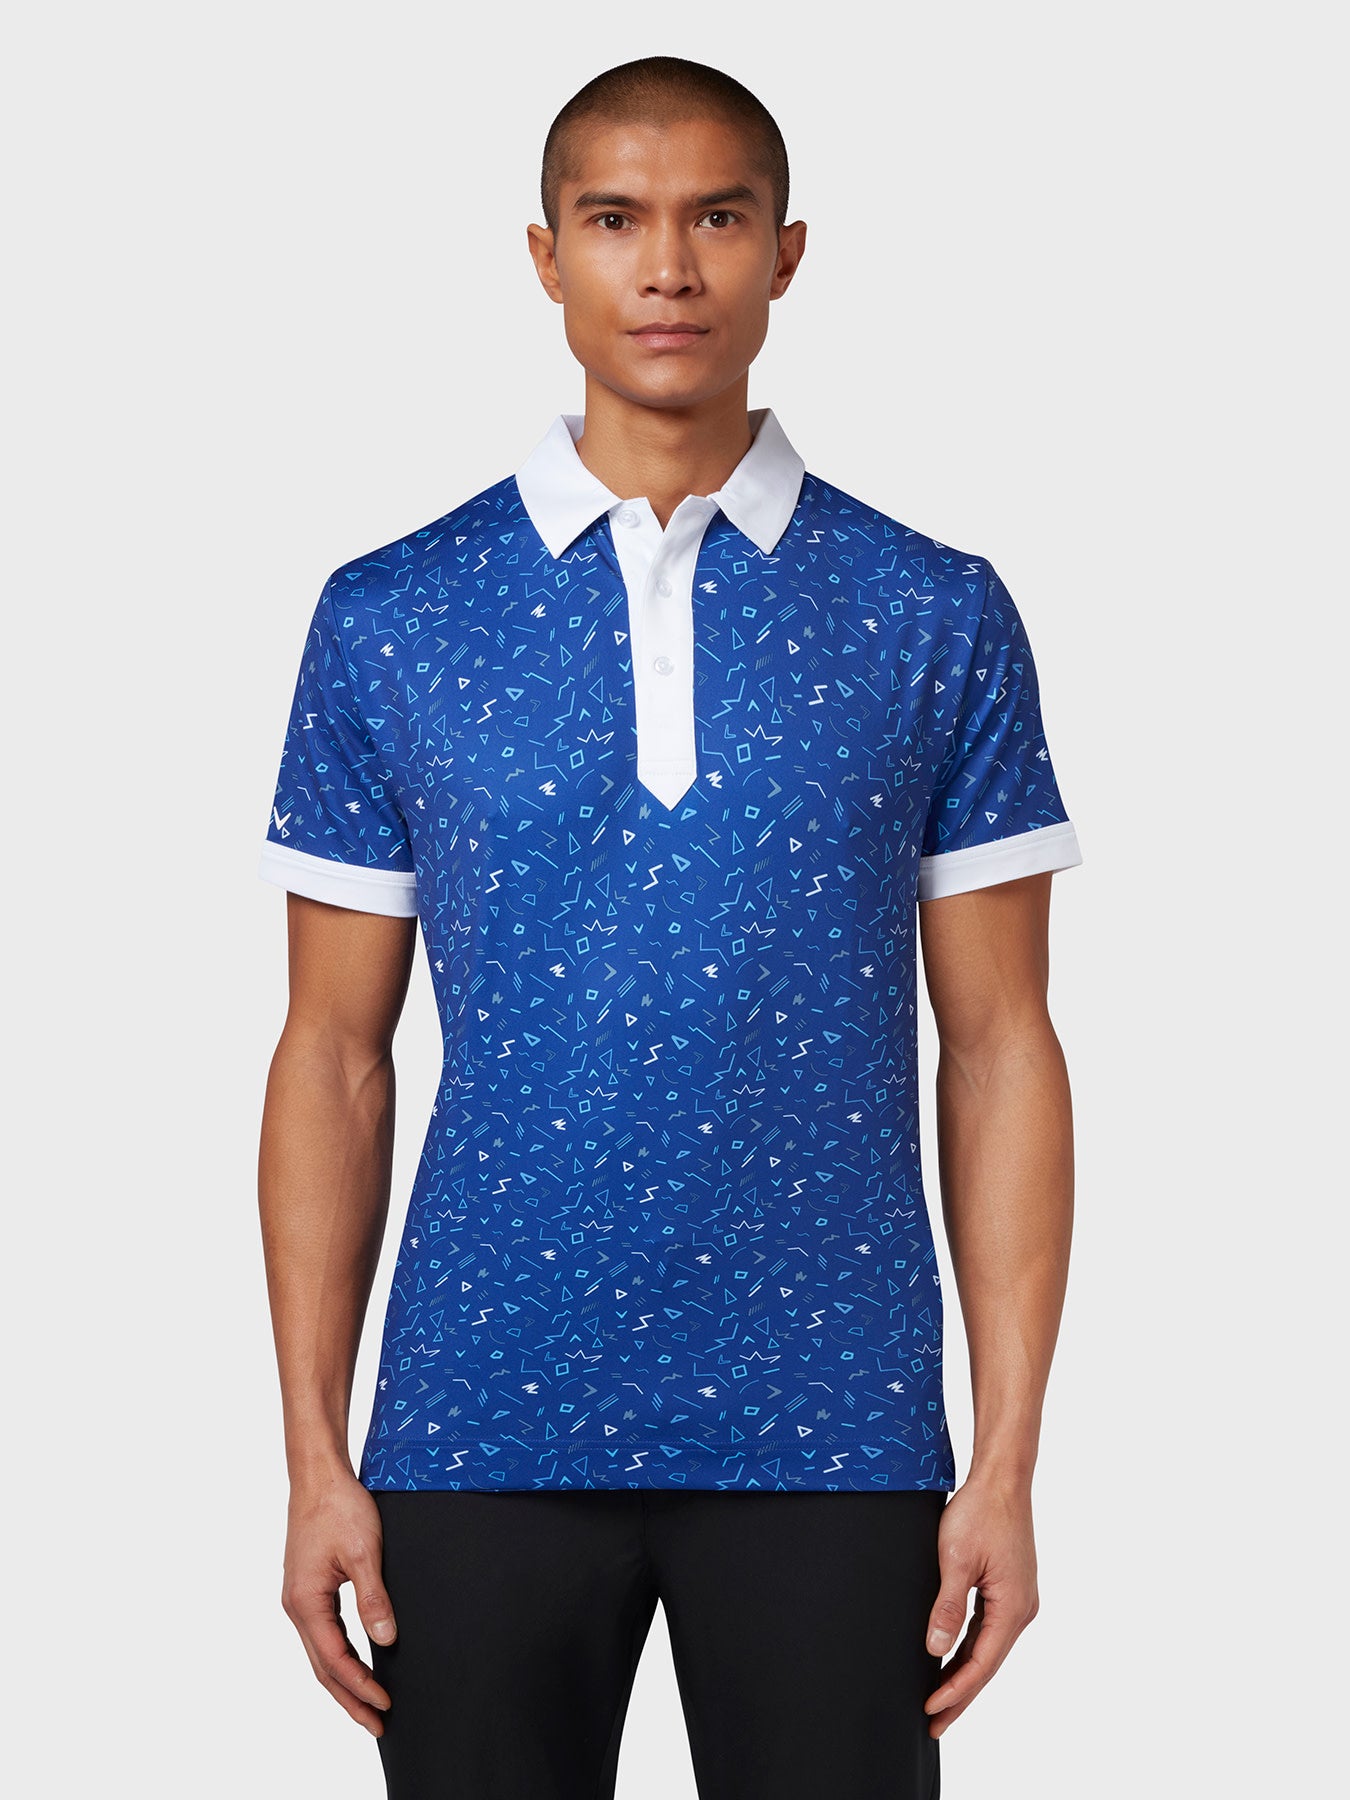 View X Series Chev Memphis All Over Print Polo In Clematis Blue Clematis Blue S information